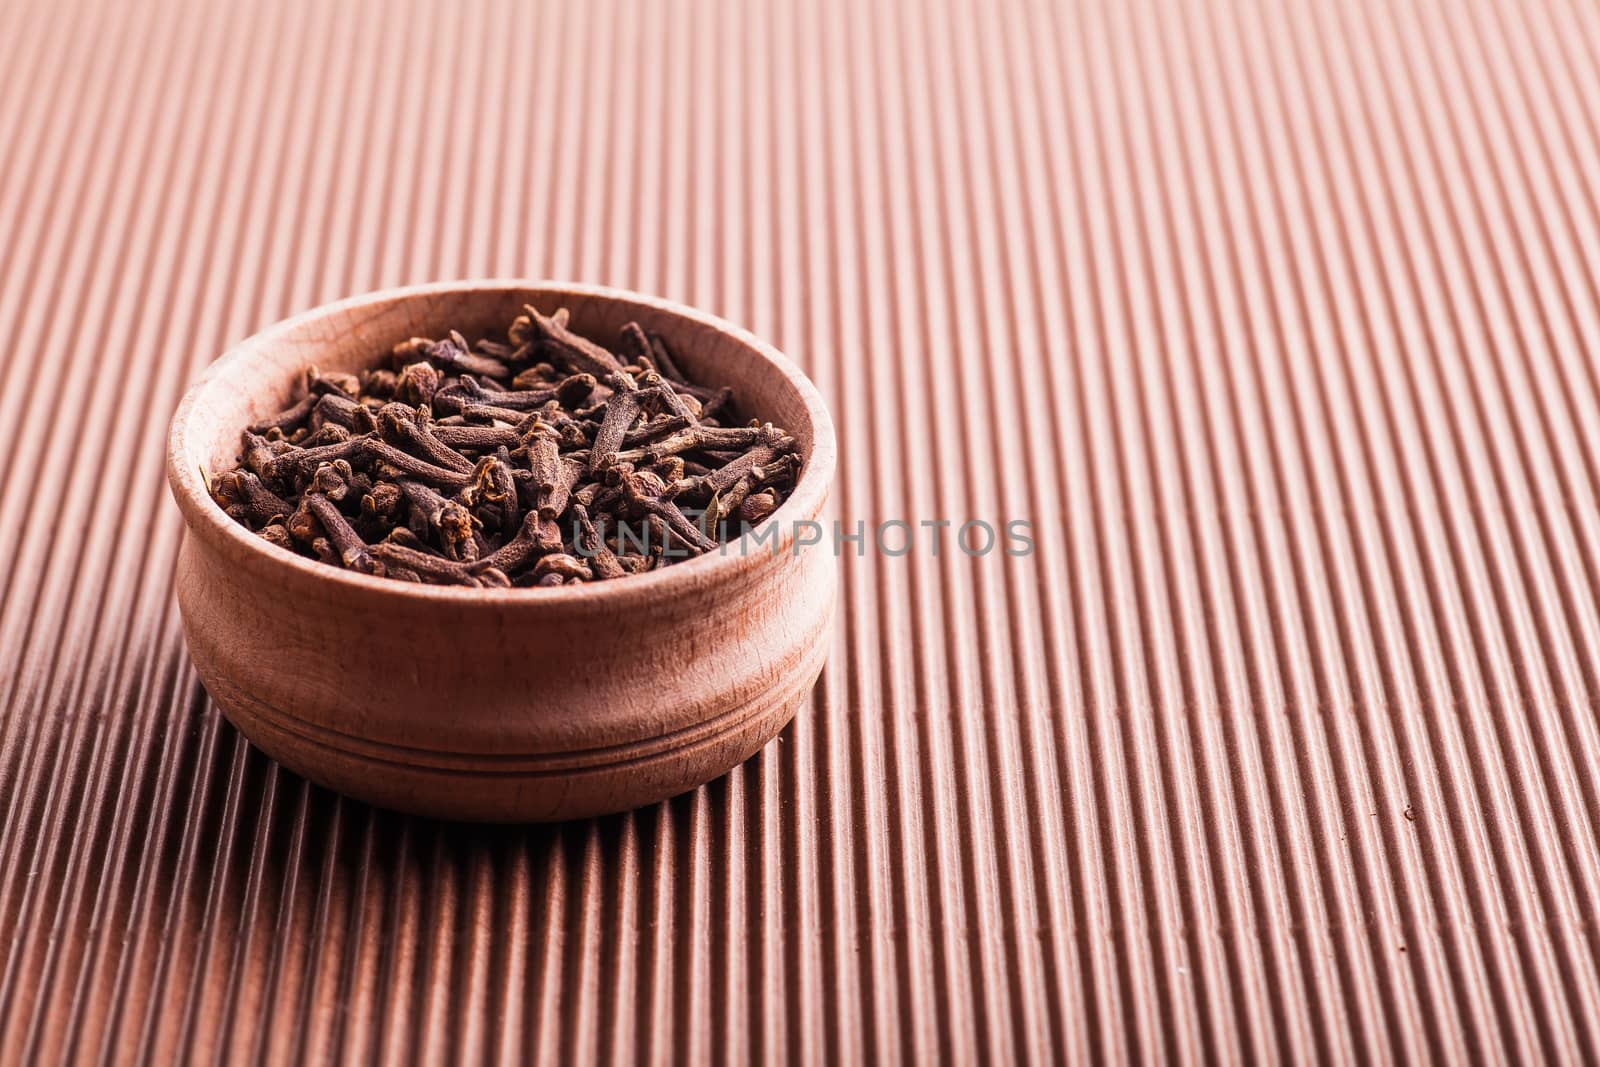 clove in a wooden bowl on a brown background